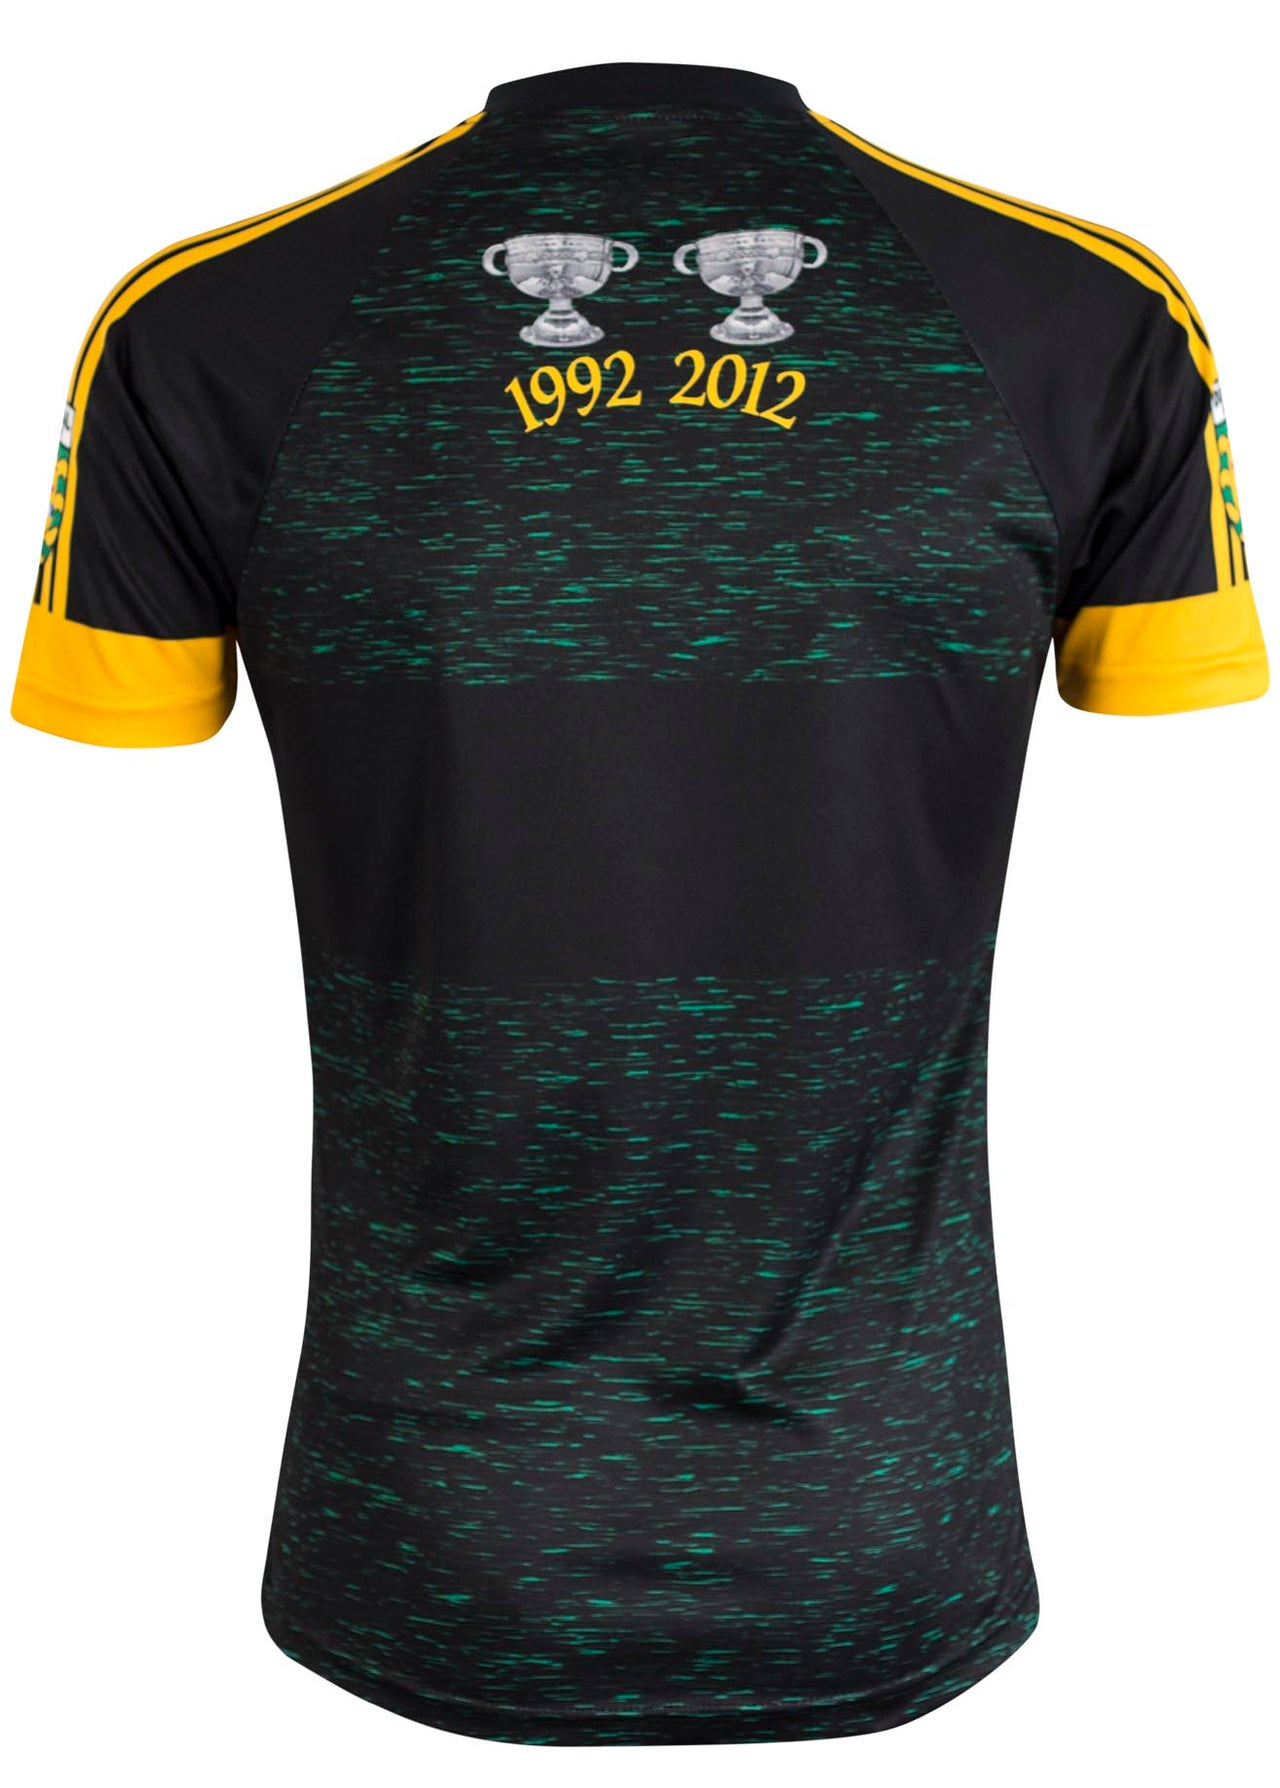 Donegal New York Away Jersey Regular Fit Adult